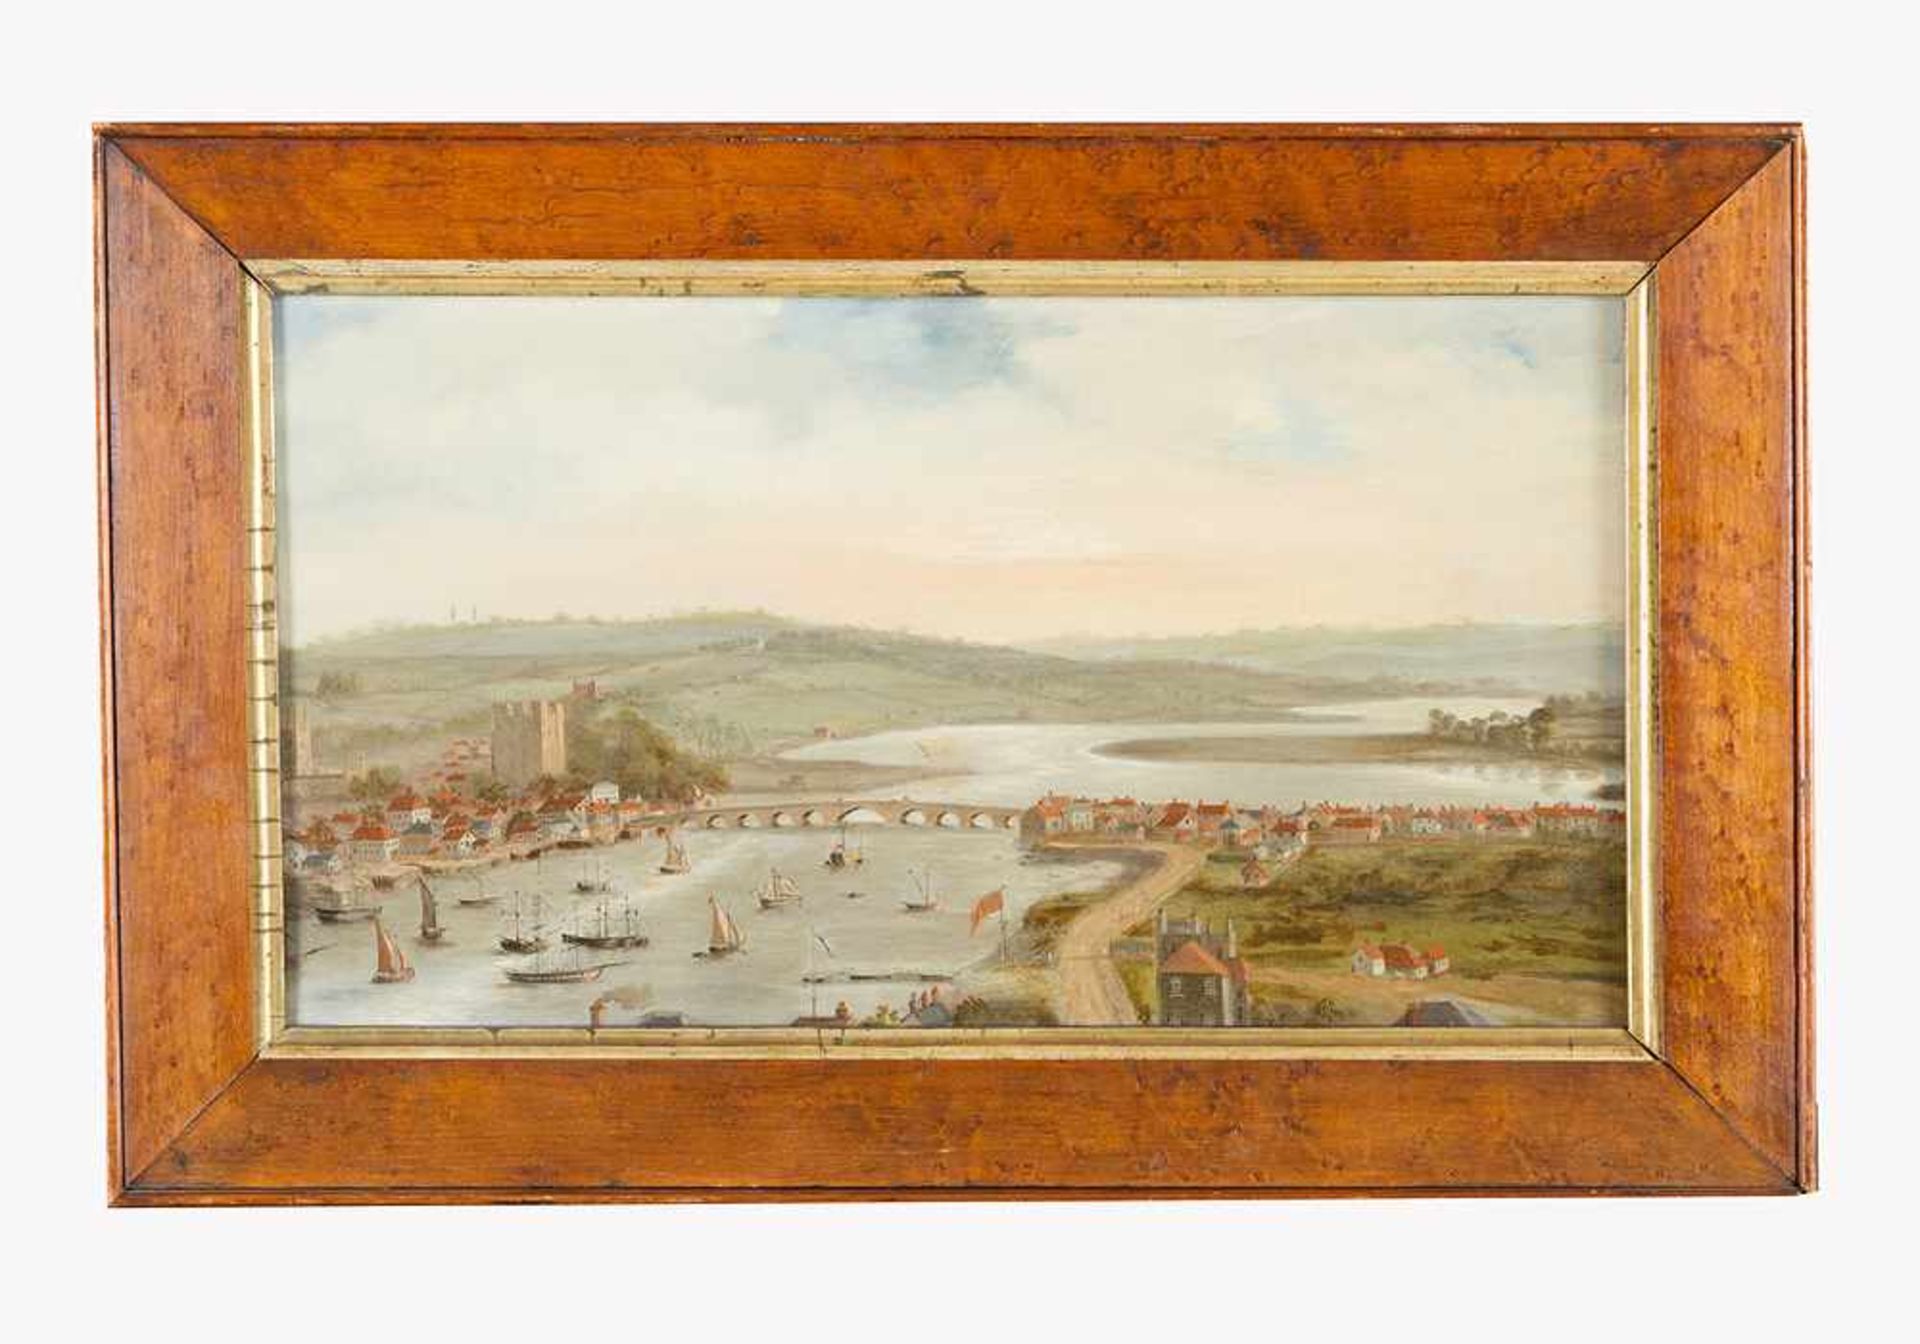 Samuel Scott (1702 – 1772)-attributed, View of the Themse with ships, a bridge and houses; oil on